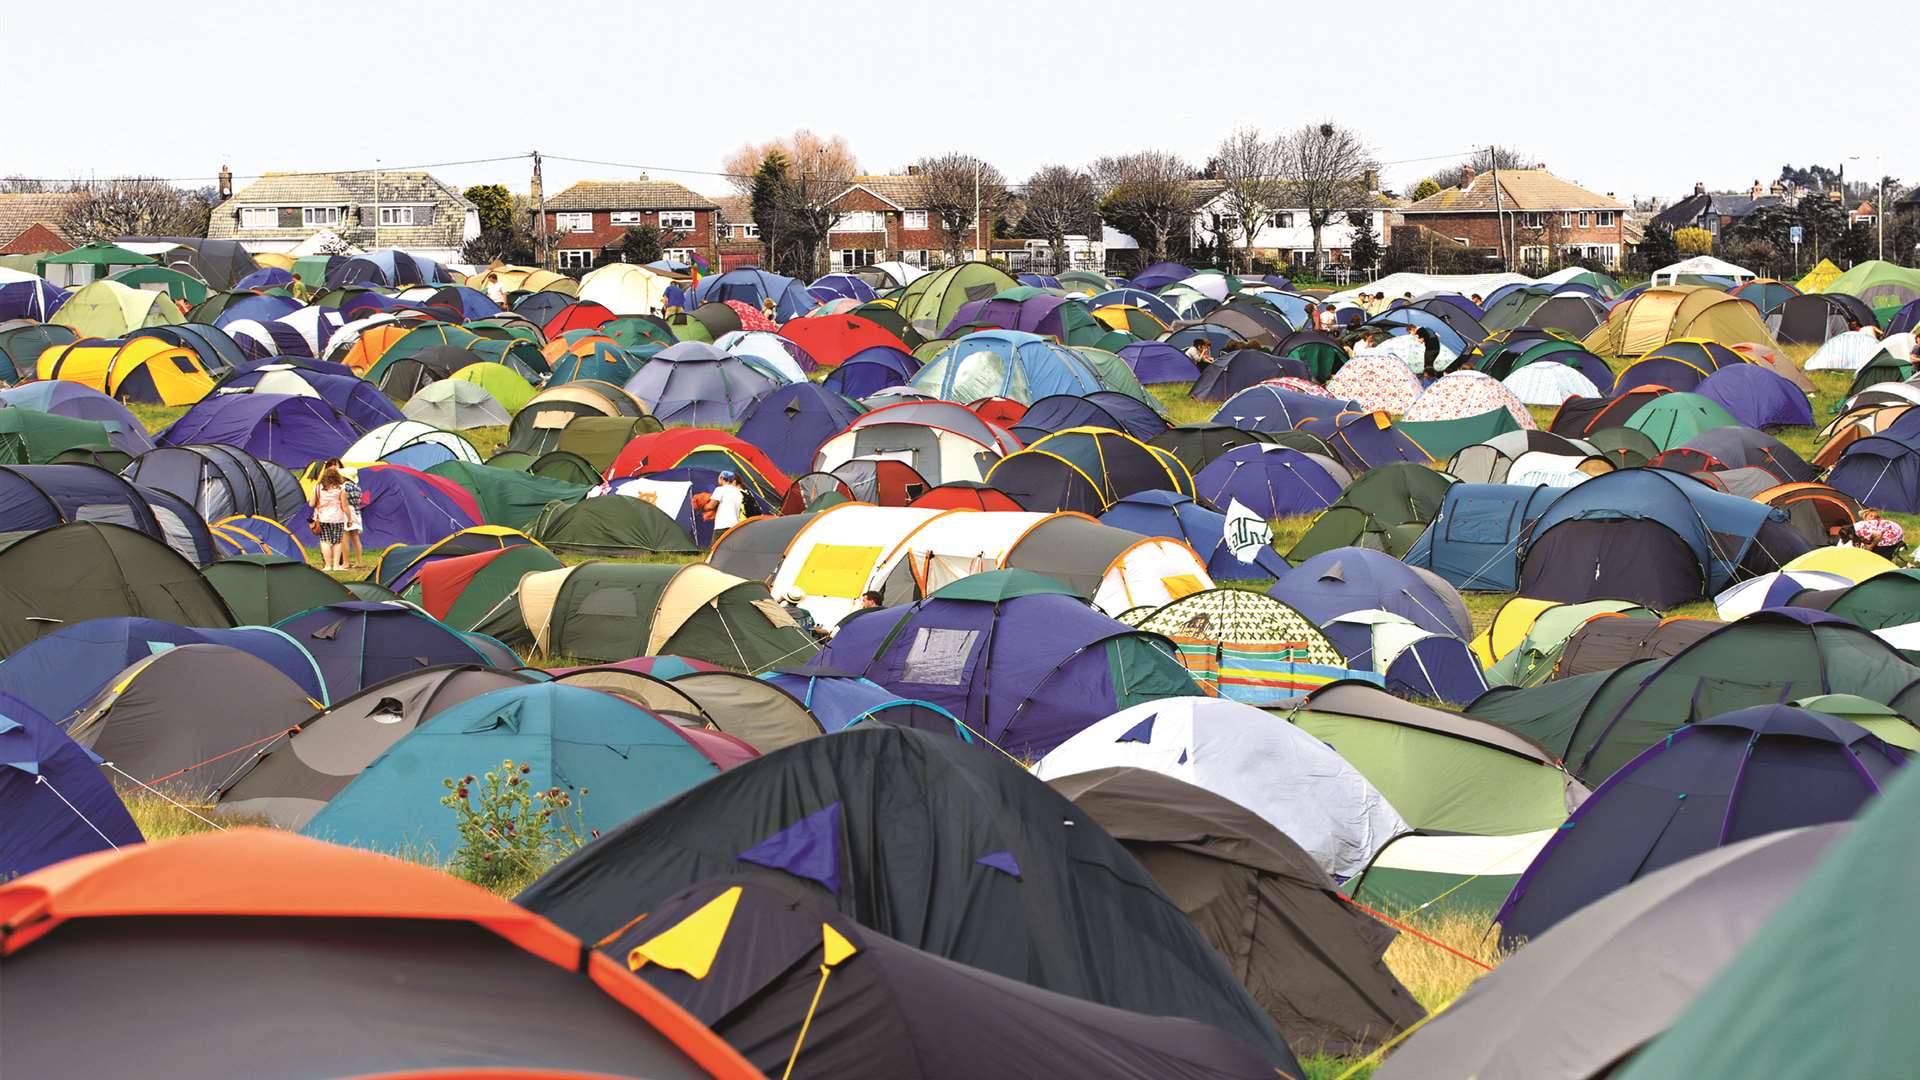 Whitstable's Church Street playing field could be transformed into a sea of tents if the plans go ahead